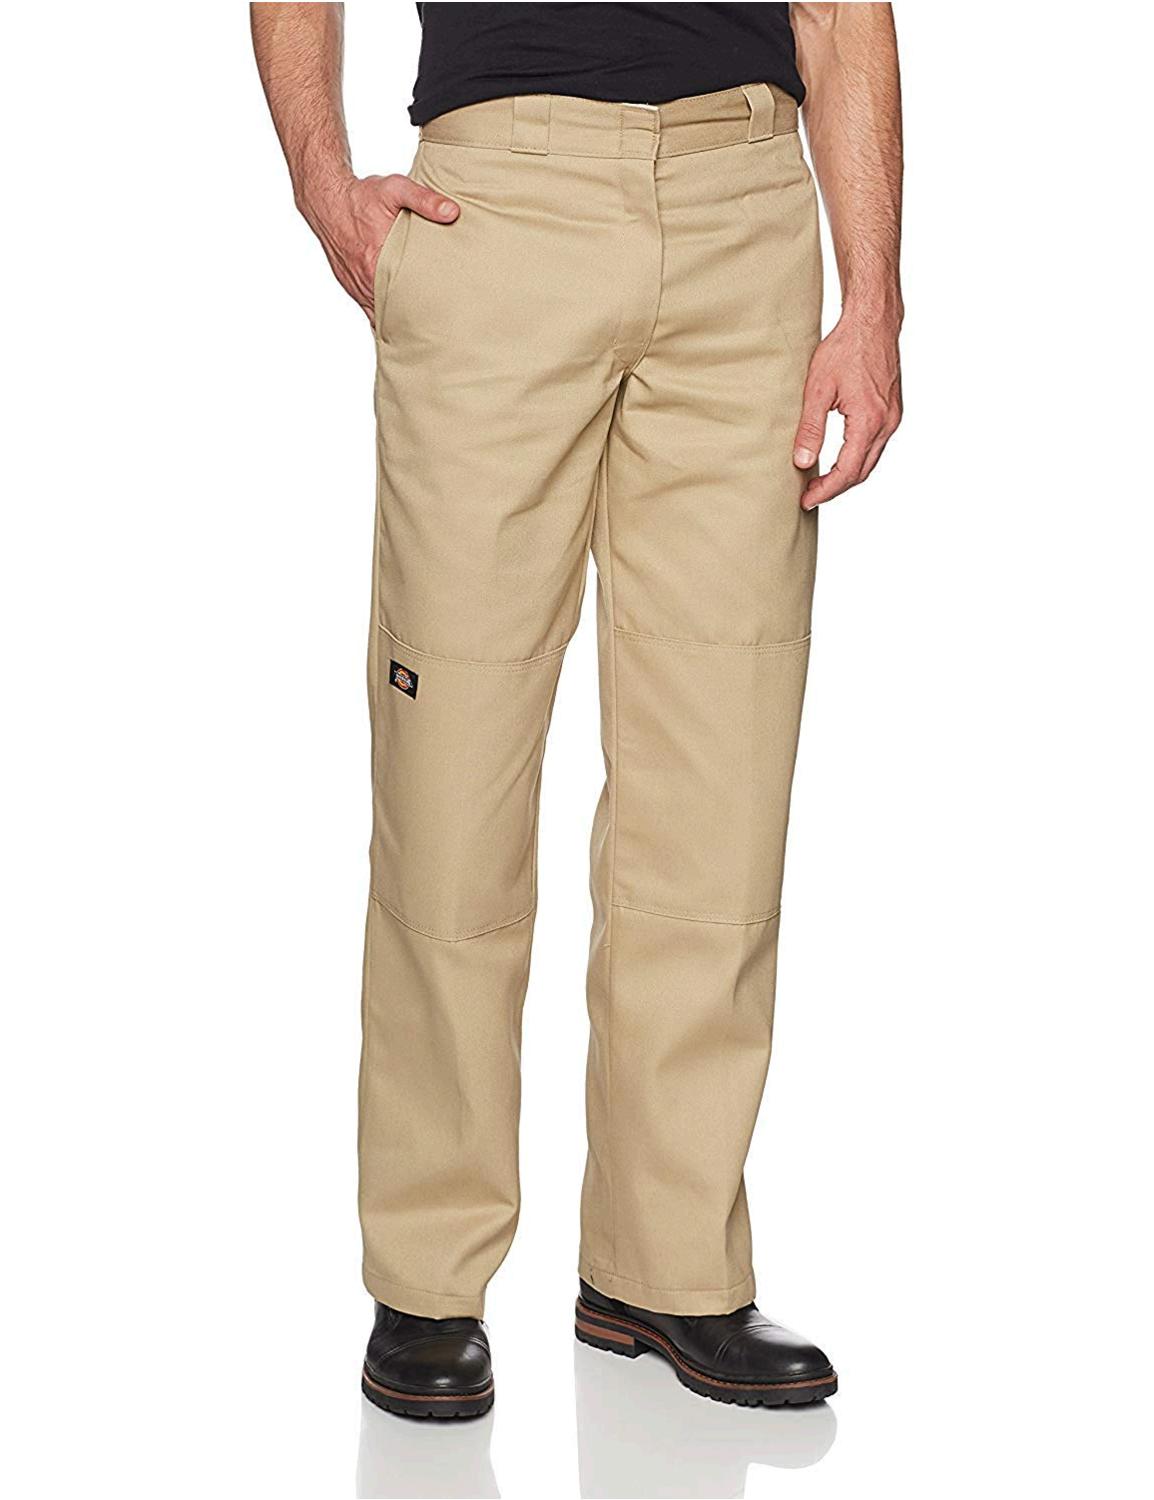 Dickies Men's Loose Fit Double Knee Twill Work Pant,, Khaki, Size 42W x ...